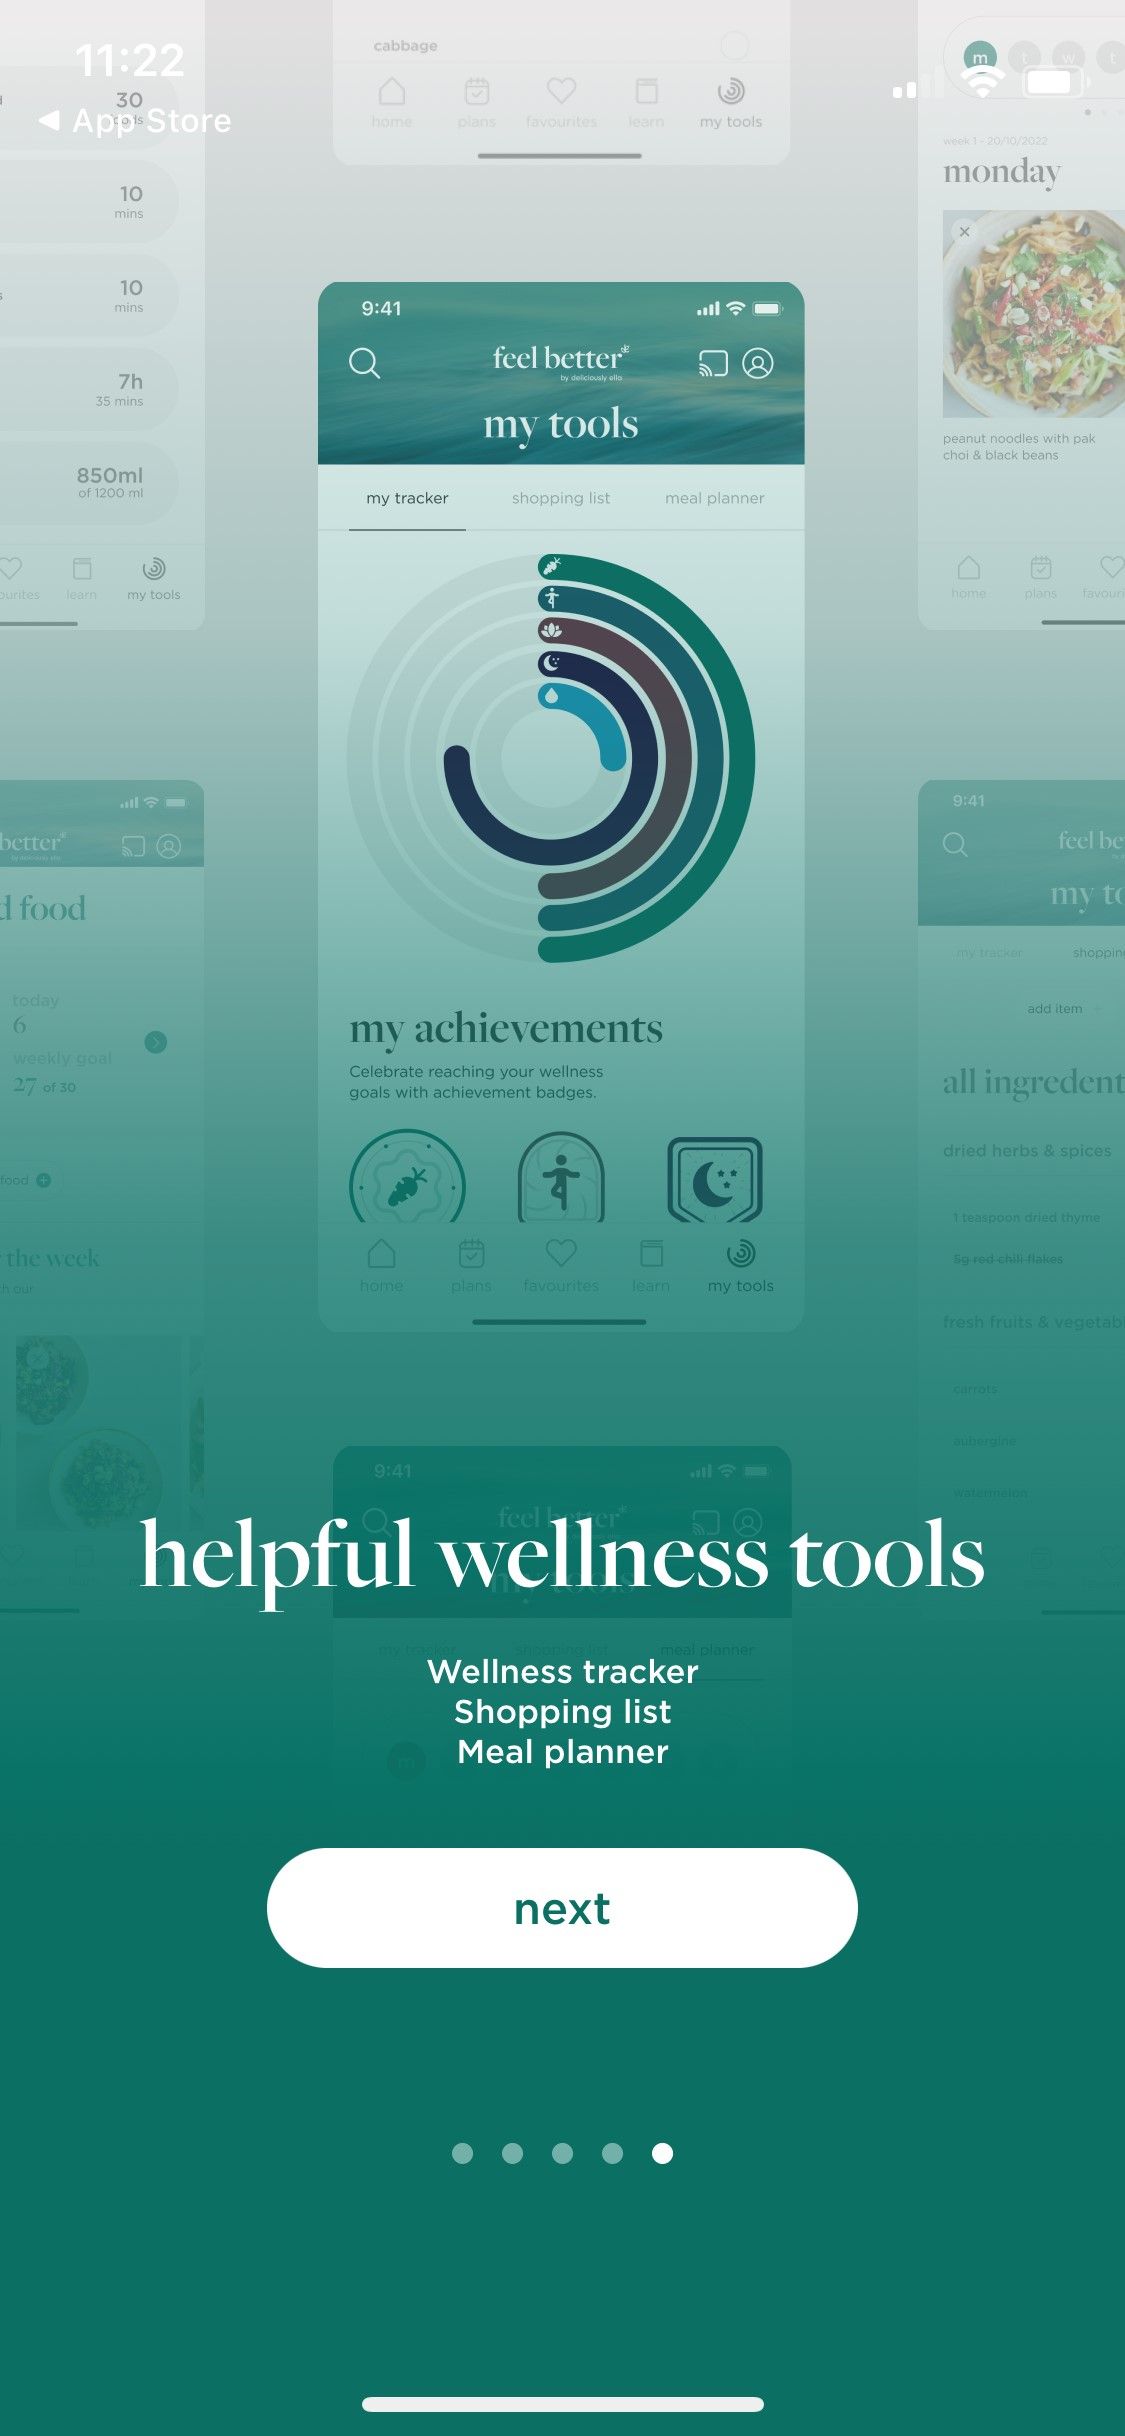 Feel Better by Deliciously Ella - Wellness Tools